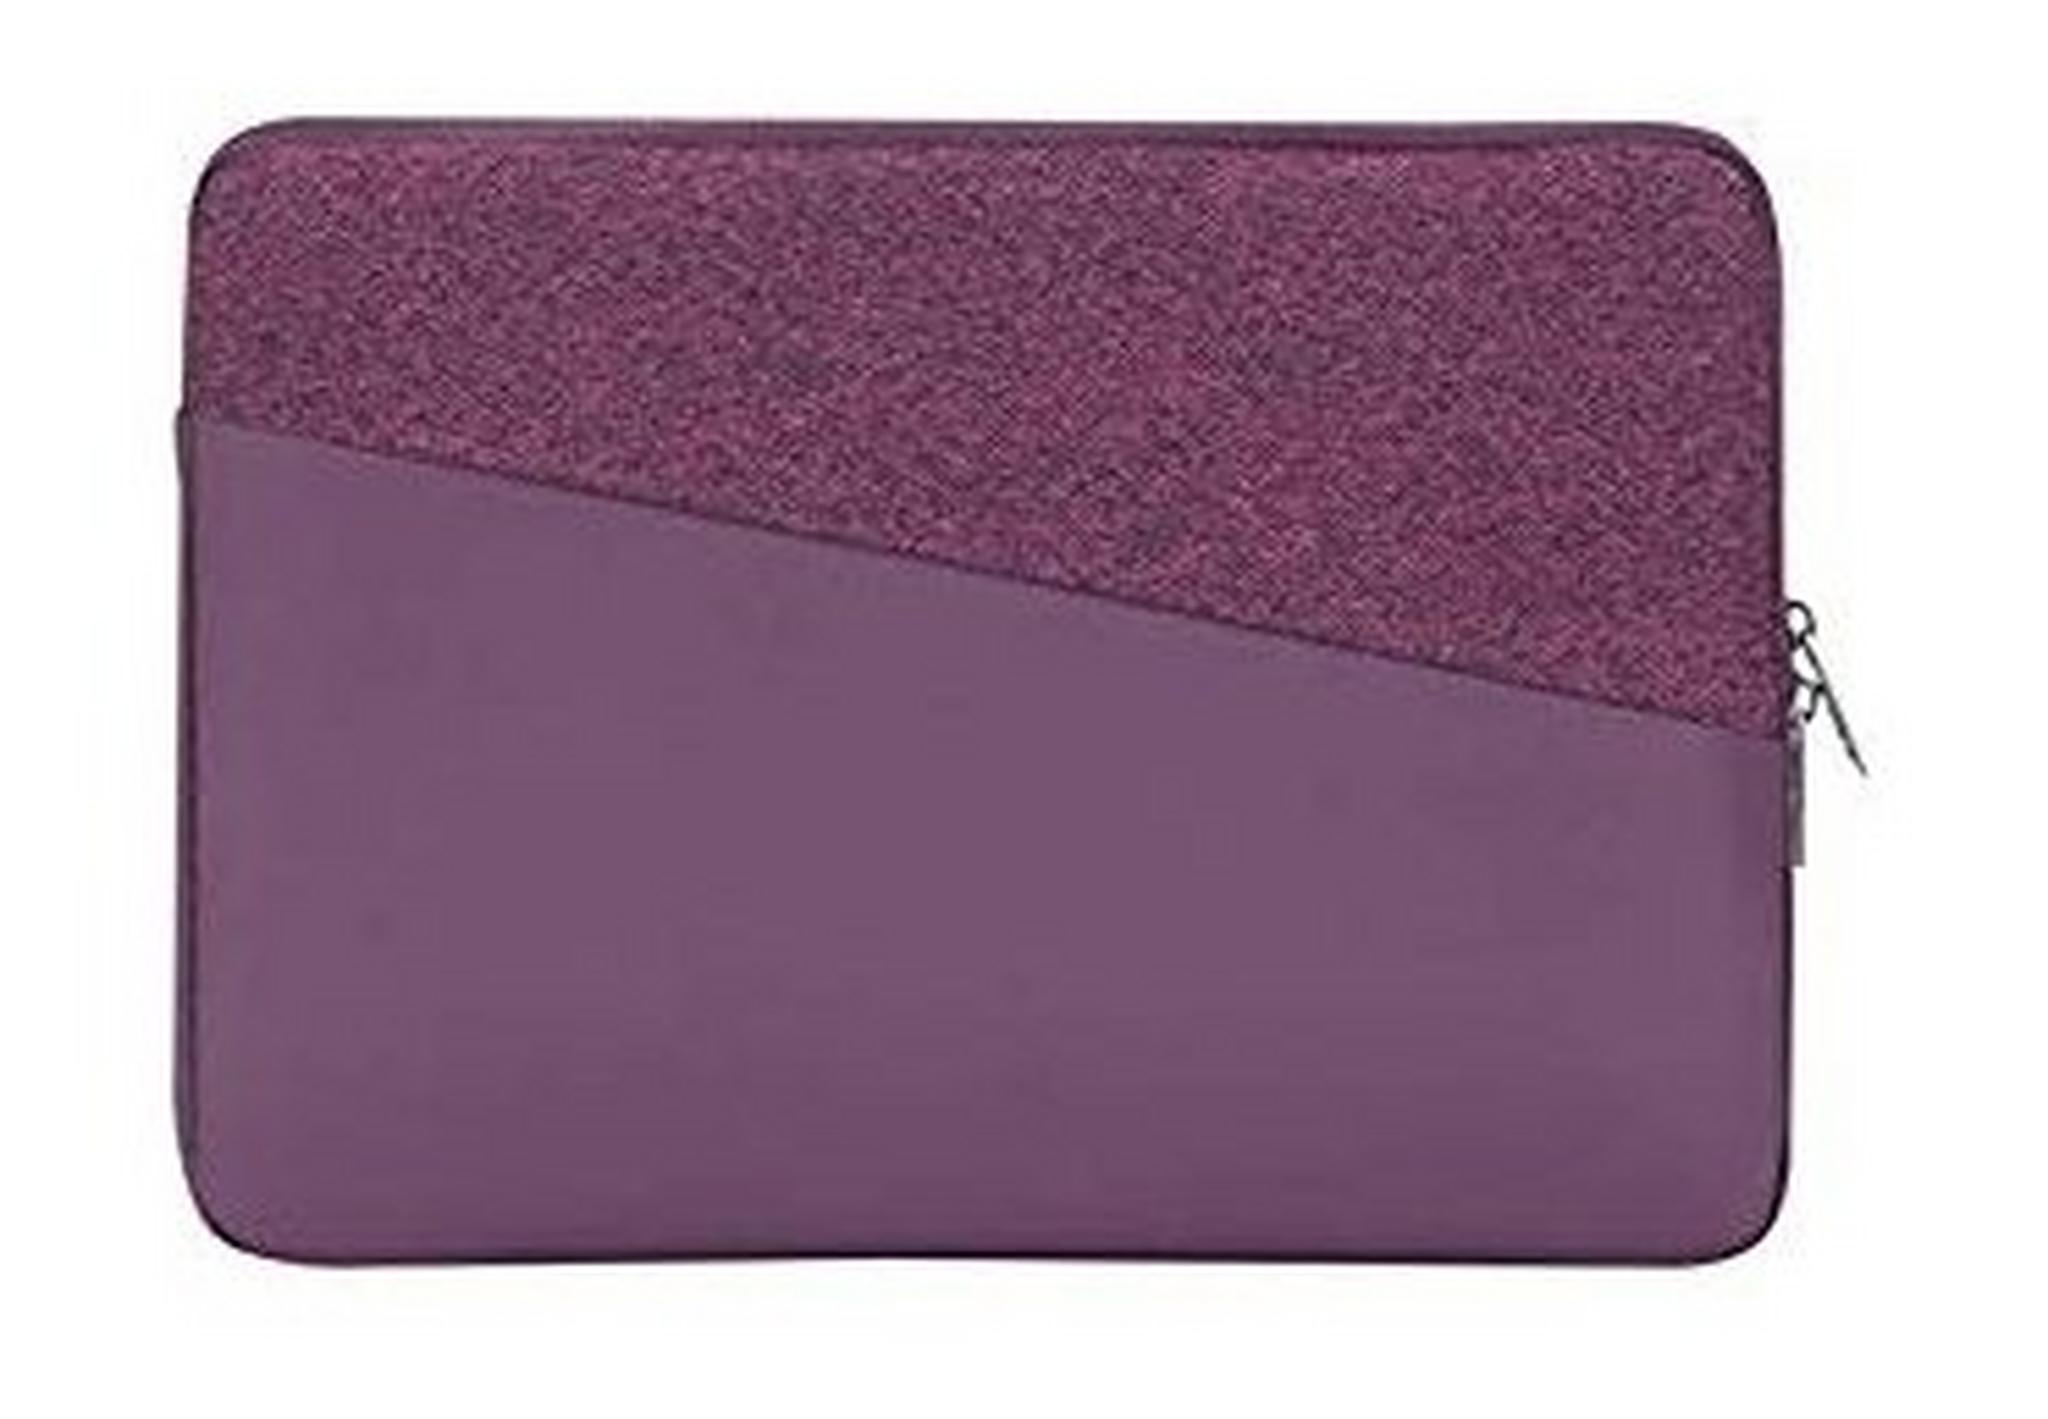 Rivacase 13.3 Sleeve for Ipad & Macbook (7903) - Red